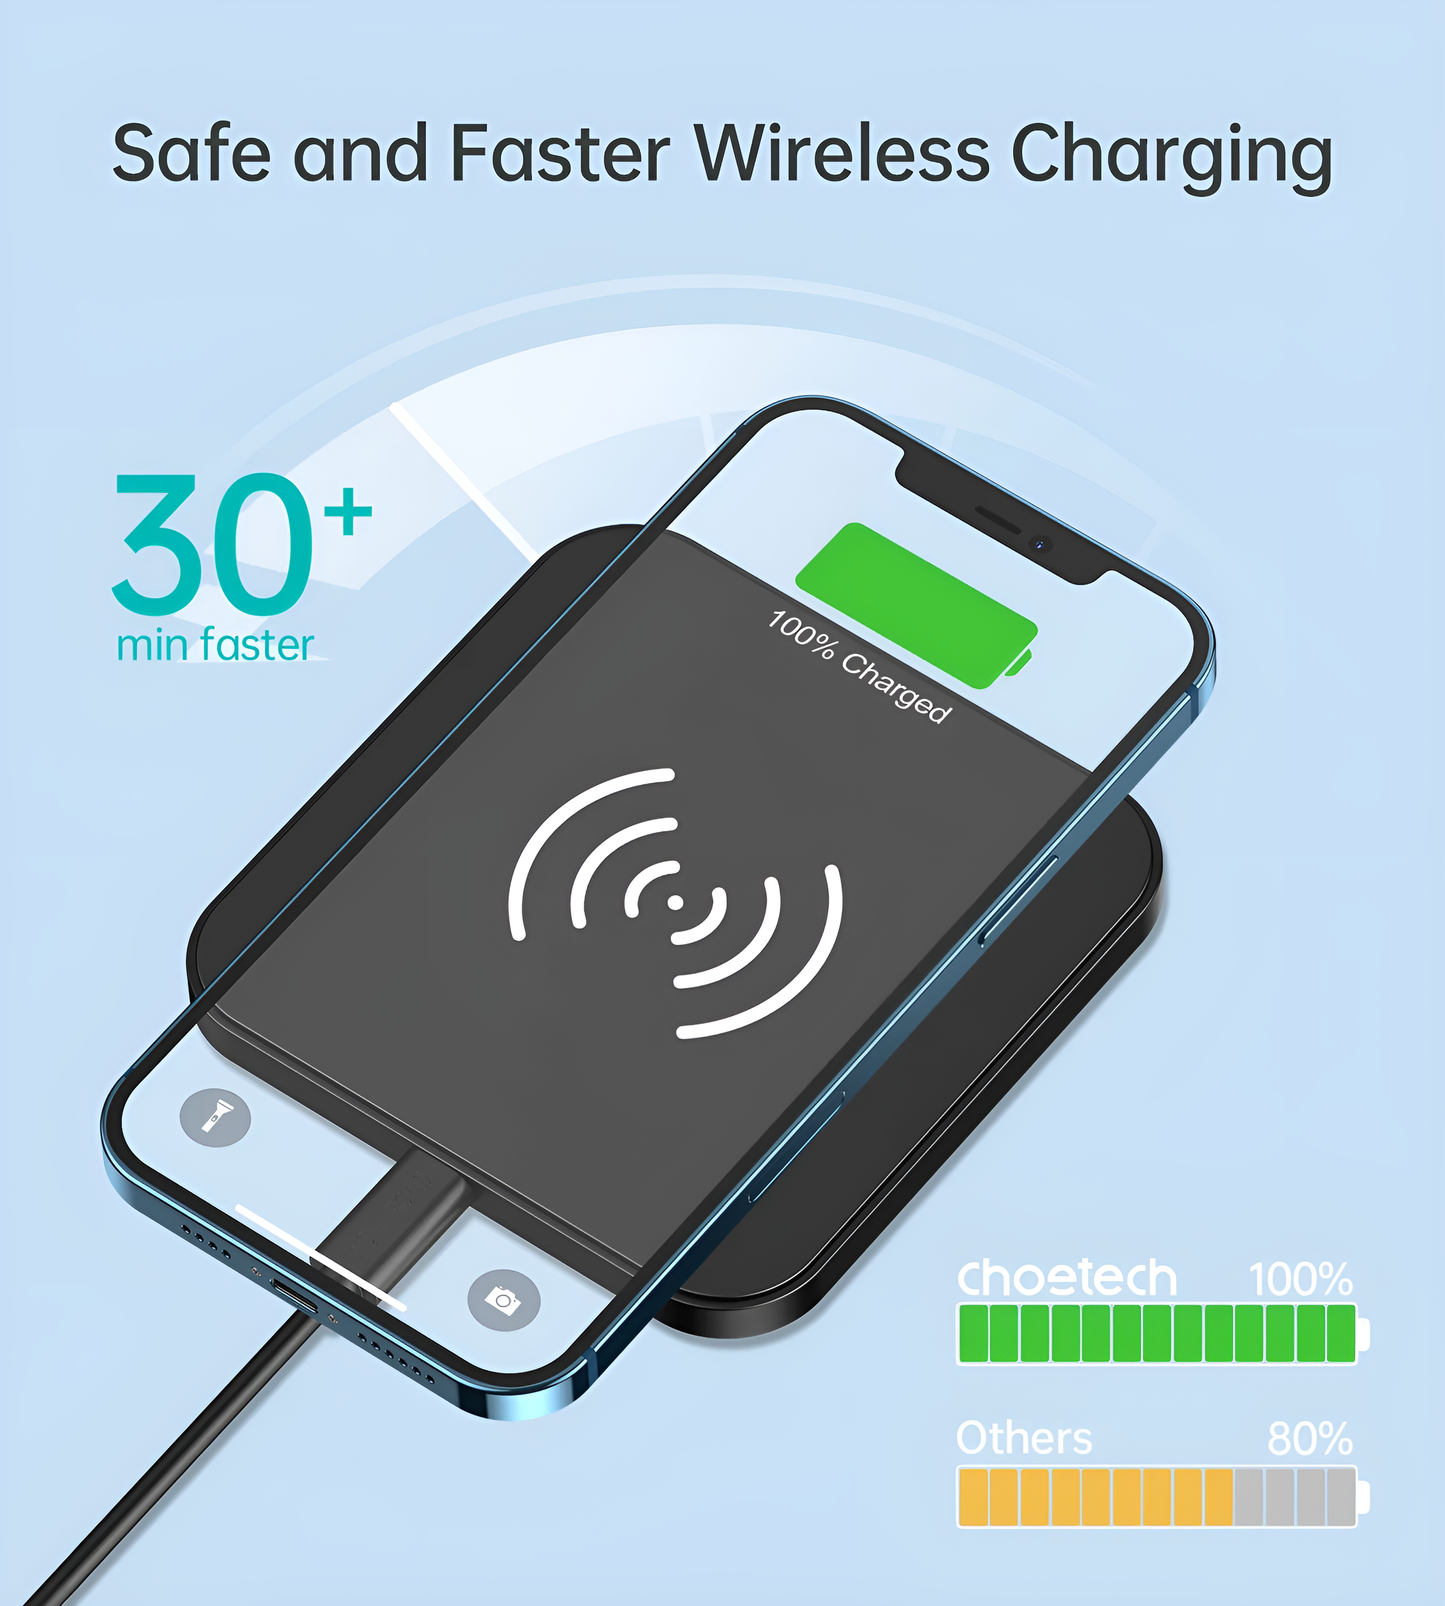 Choetech 10W Fast Wireless Charger for Qi Wireless charging Supported Mobiles, T511-S by jcbl accessories. Safe abd faster wireless charging, 30+ min faster, choetech 100%, others 80%